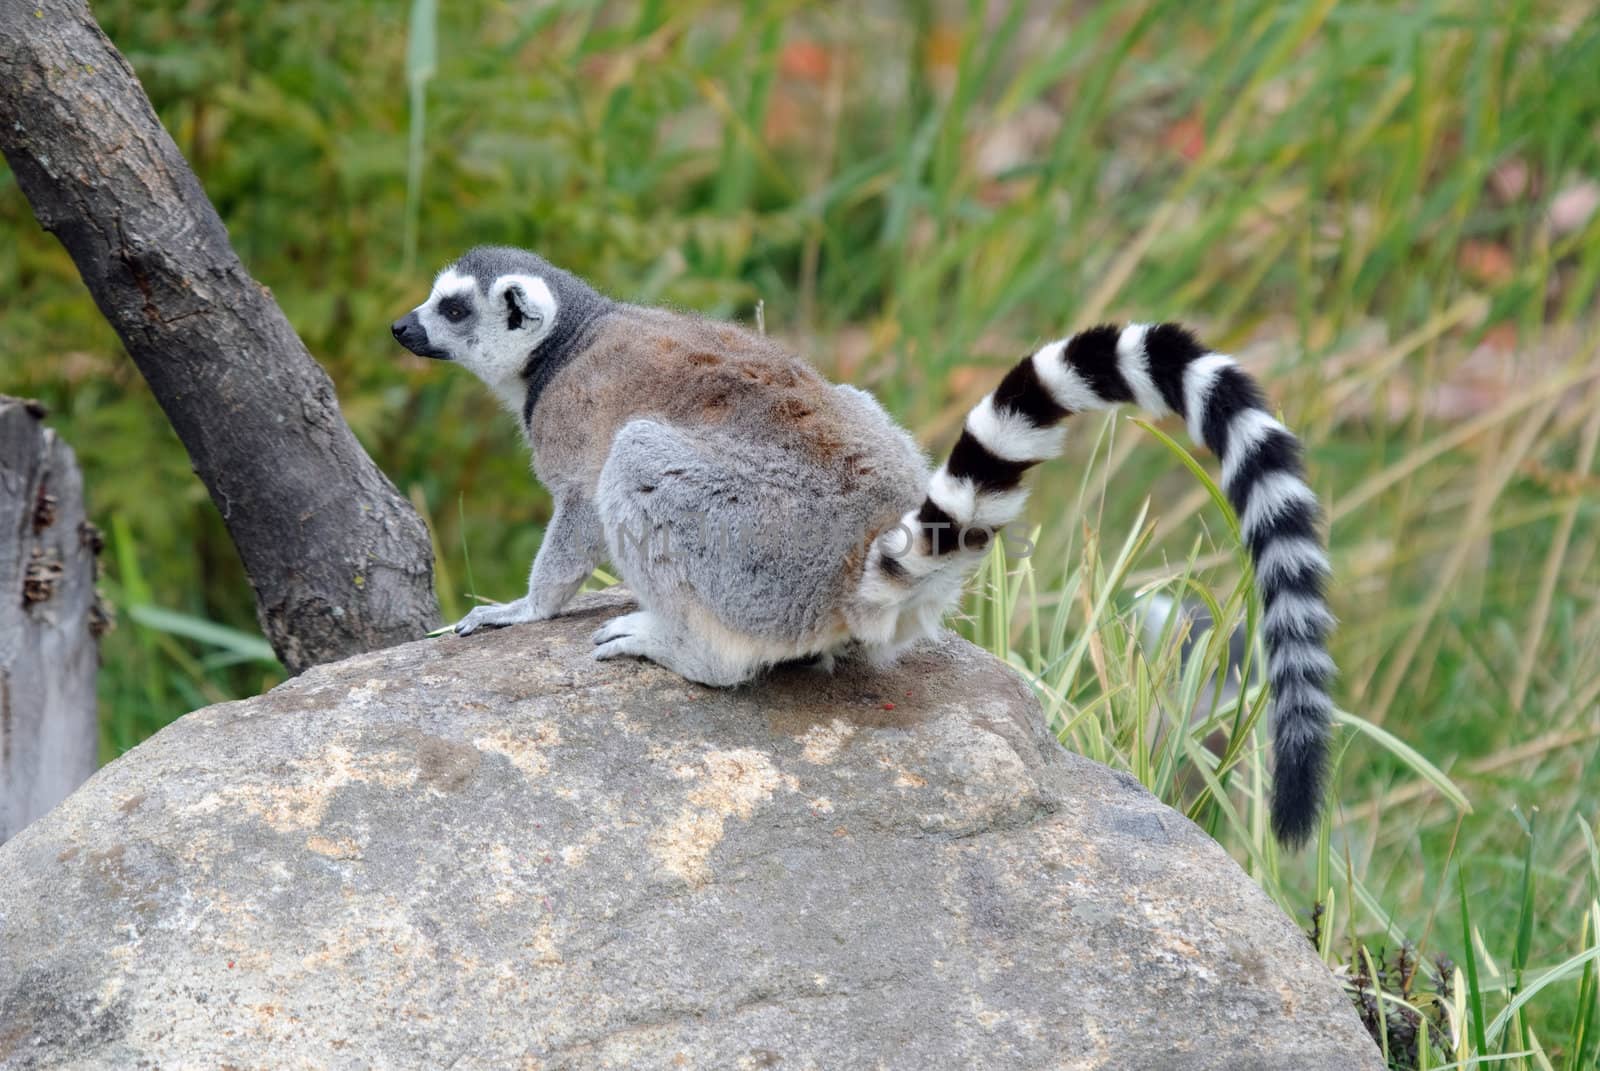 Picture of a beautiful Ring-tailed Lemur from Madagascar